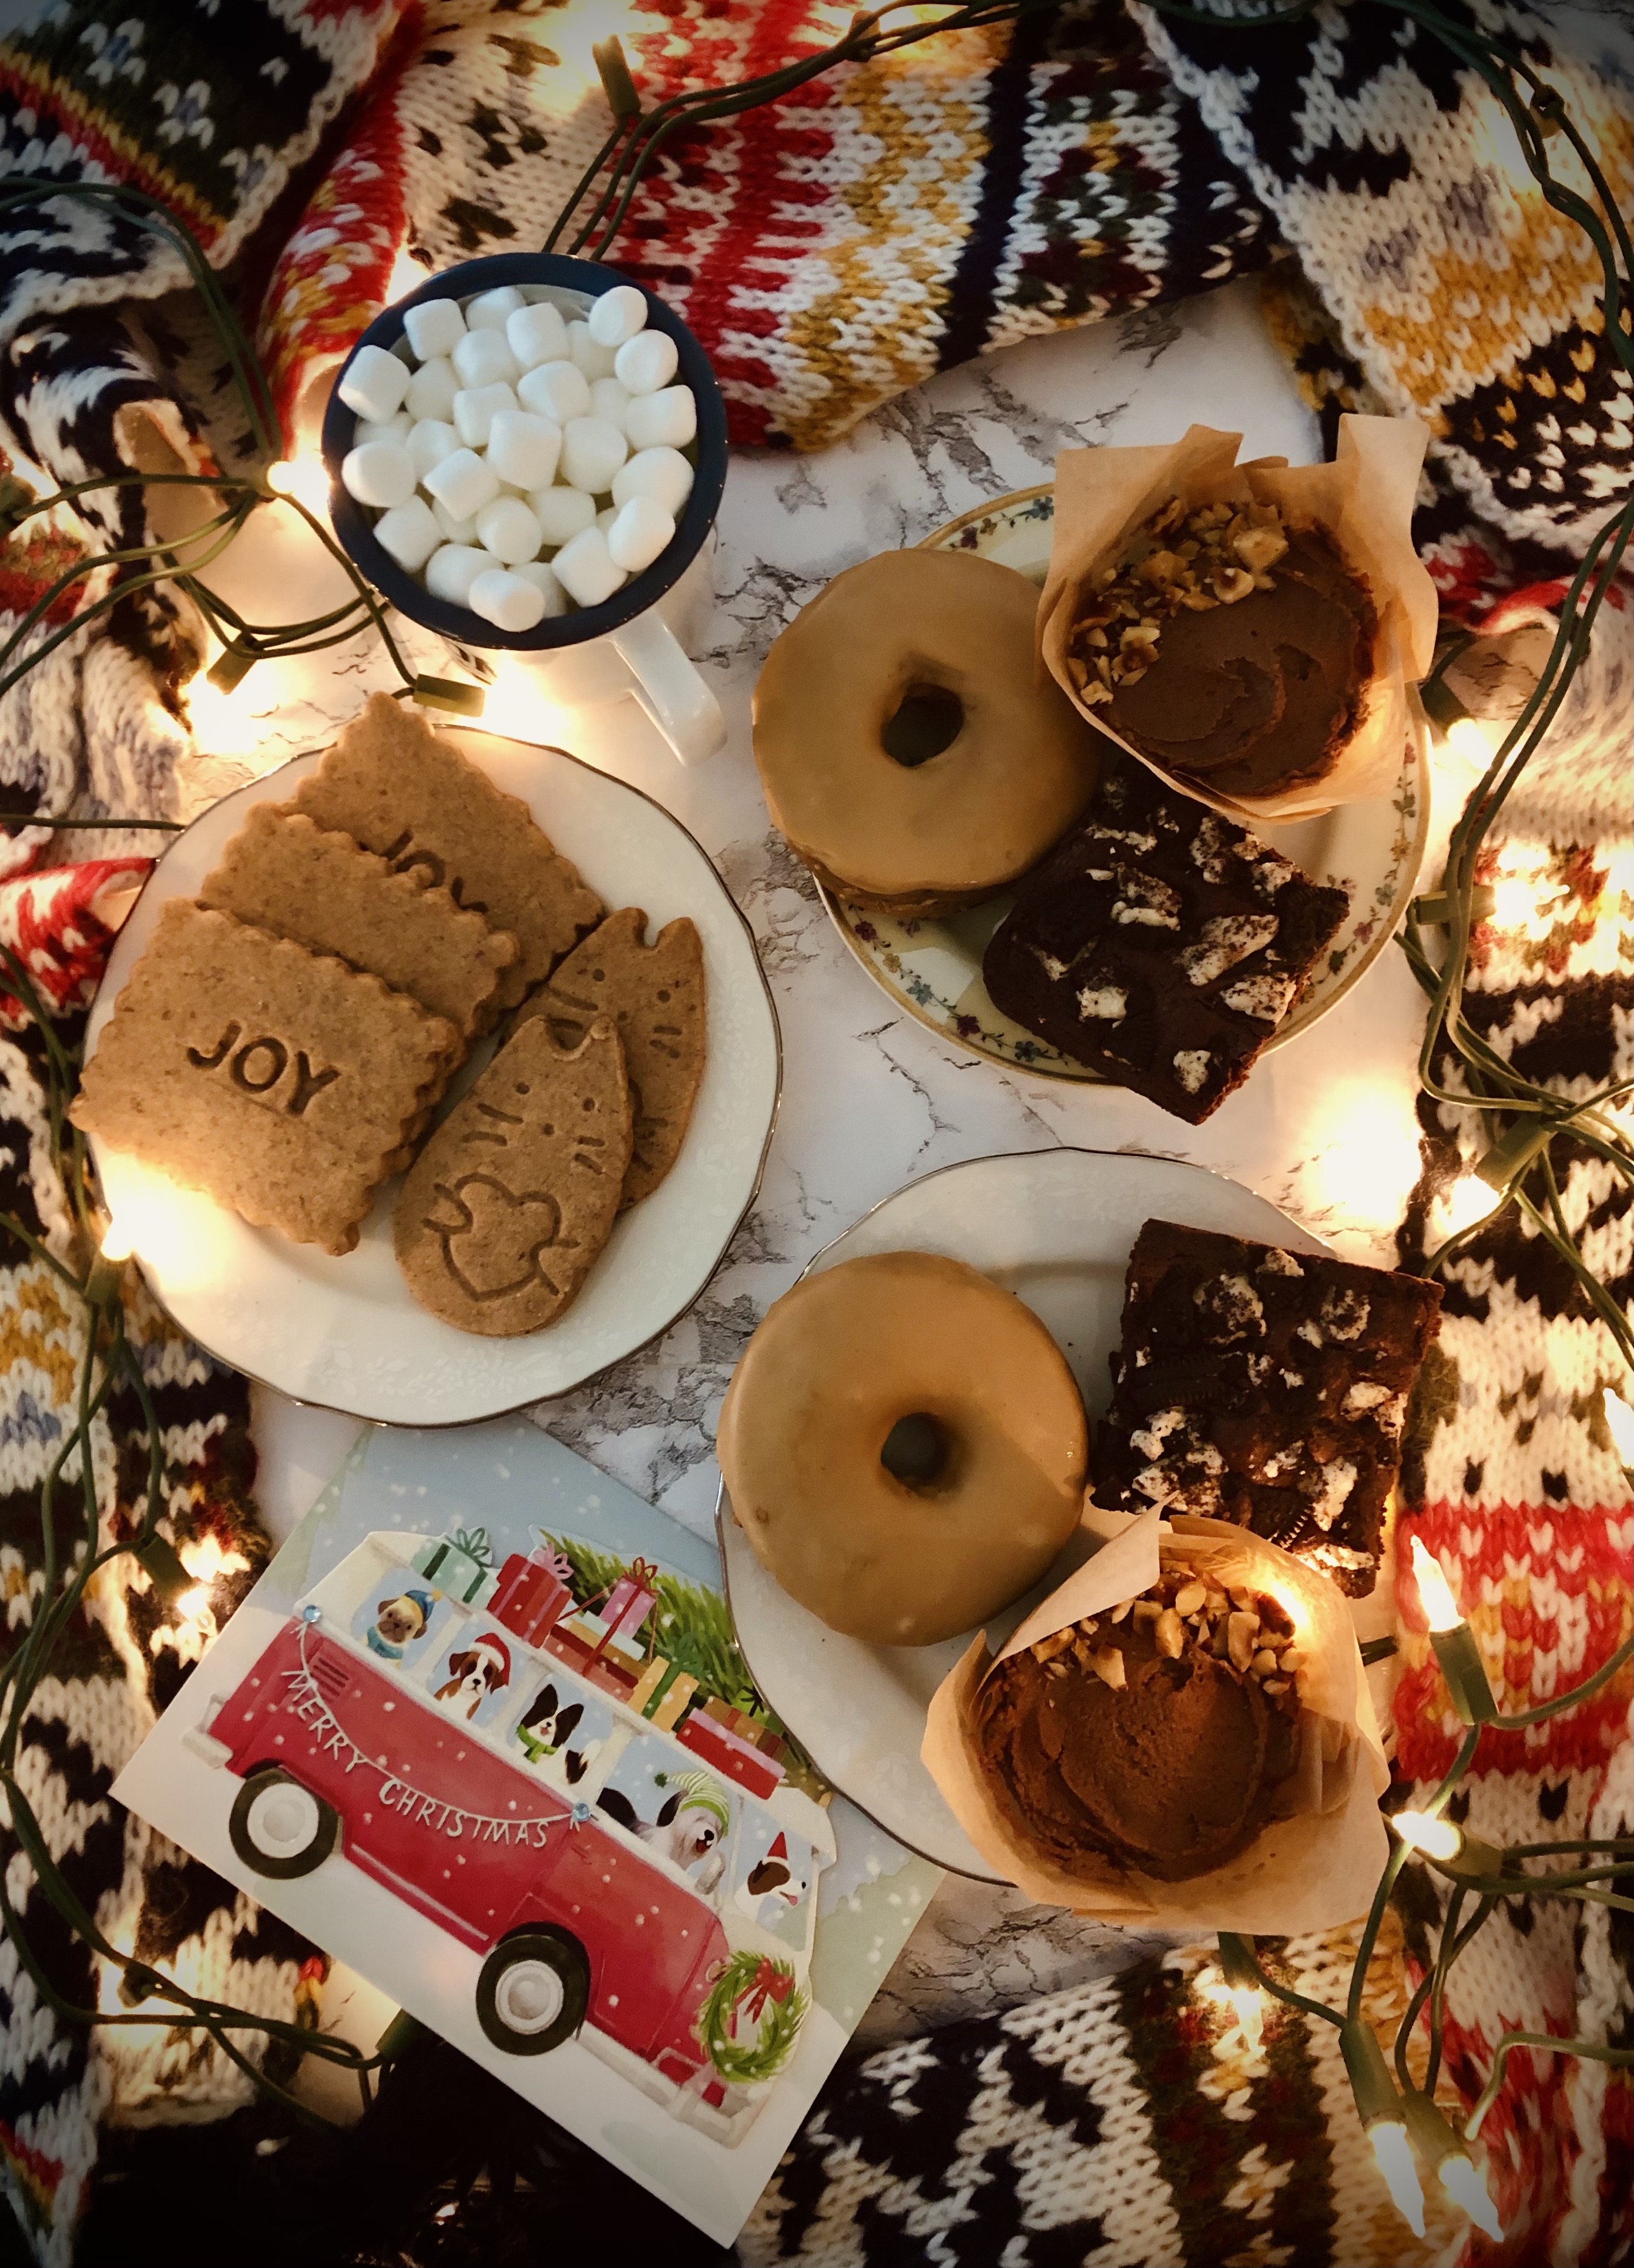 Overhead view of plates of cookies, donuts, brownies, and cupcakes, surrounded by a yarn knit scarf and holiday lights; dog holiday card and cup of marshmallows